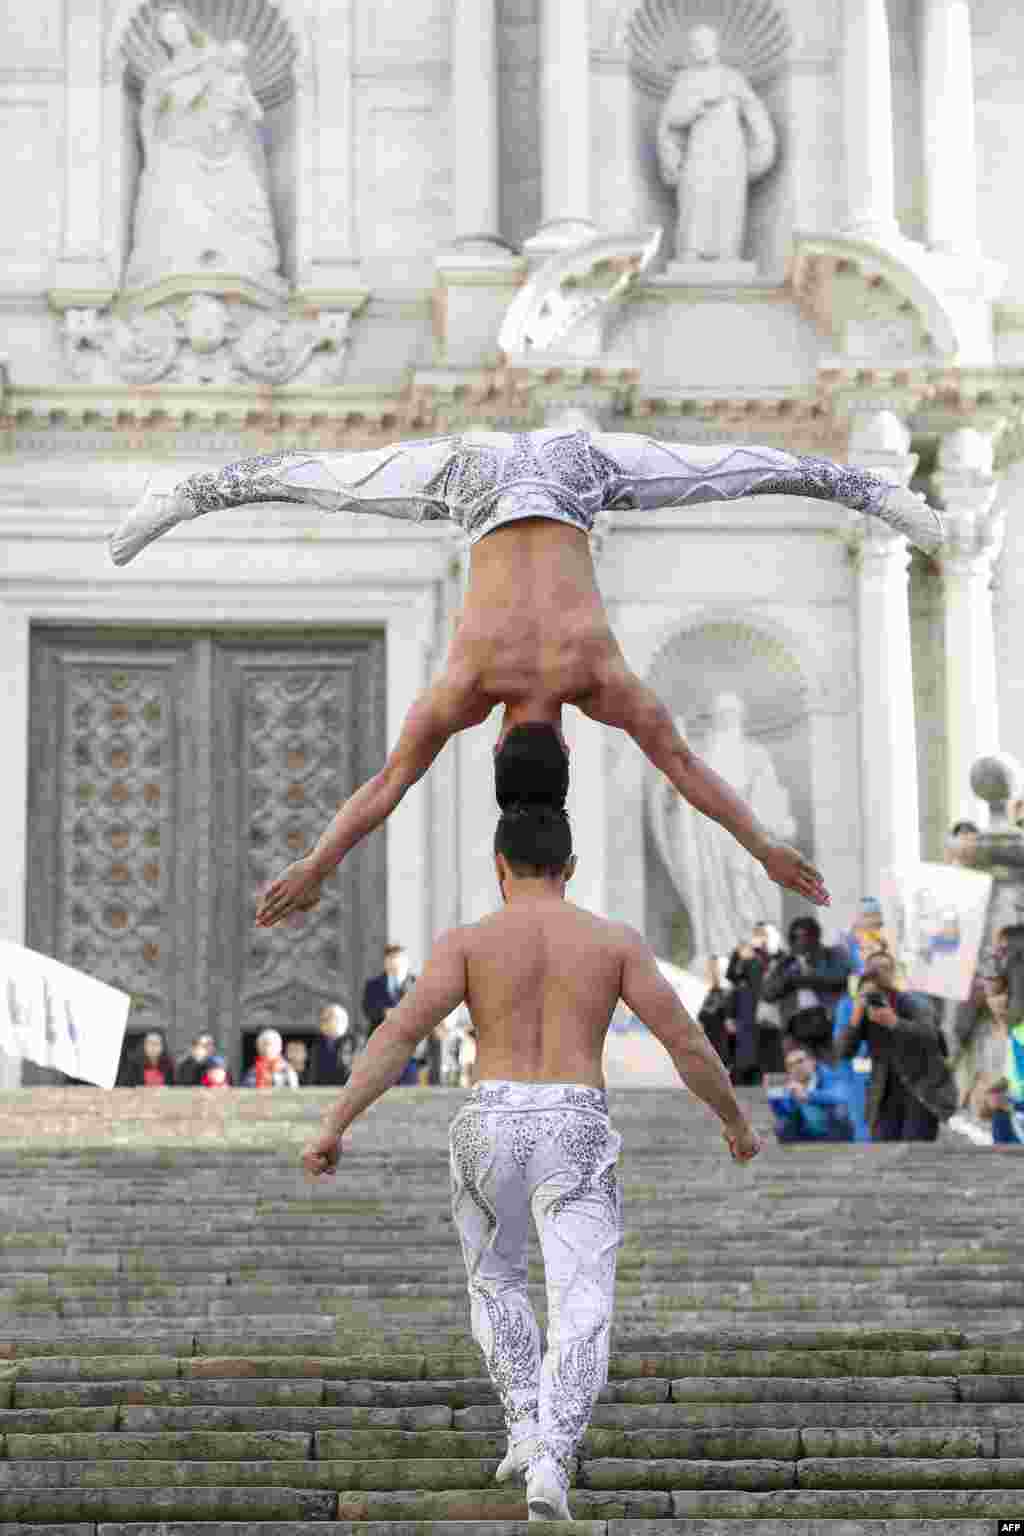 Vietnamese artist Quoc Co Giang (down) and his brother Quoc Nghiep Giang try to break the Guinness World Record by climbing stairs with one carrying the other on head to head balancing at the Cathedral of Girona, Spain.